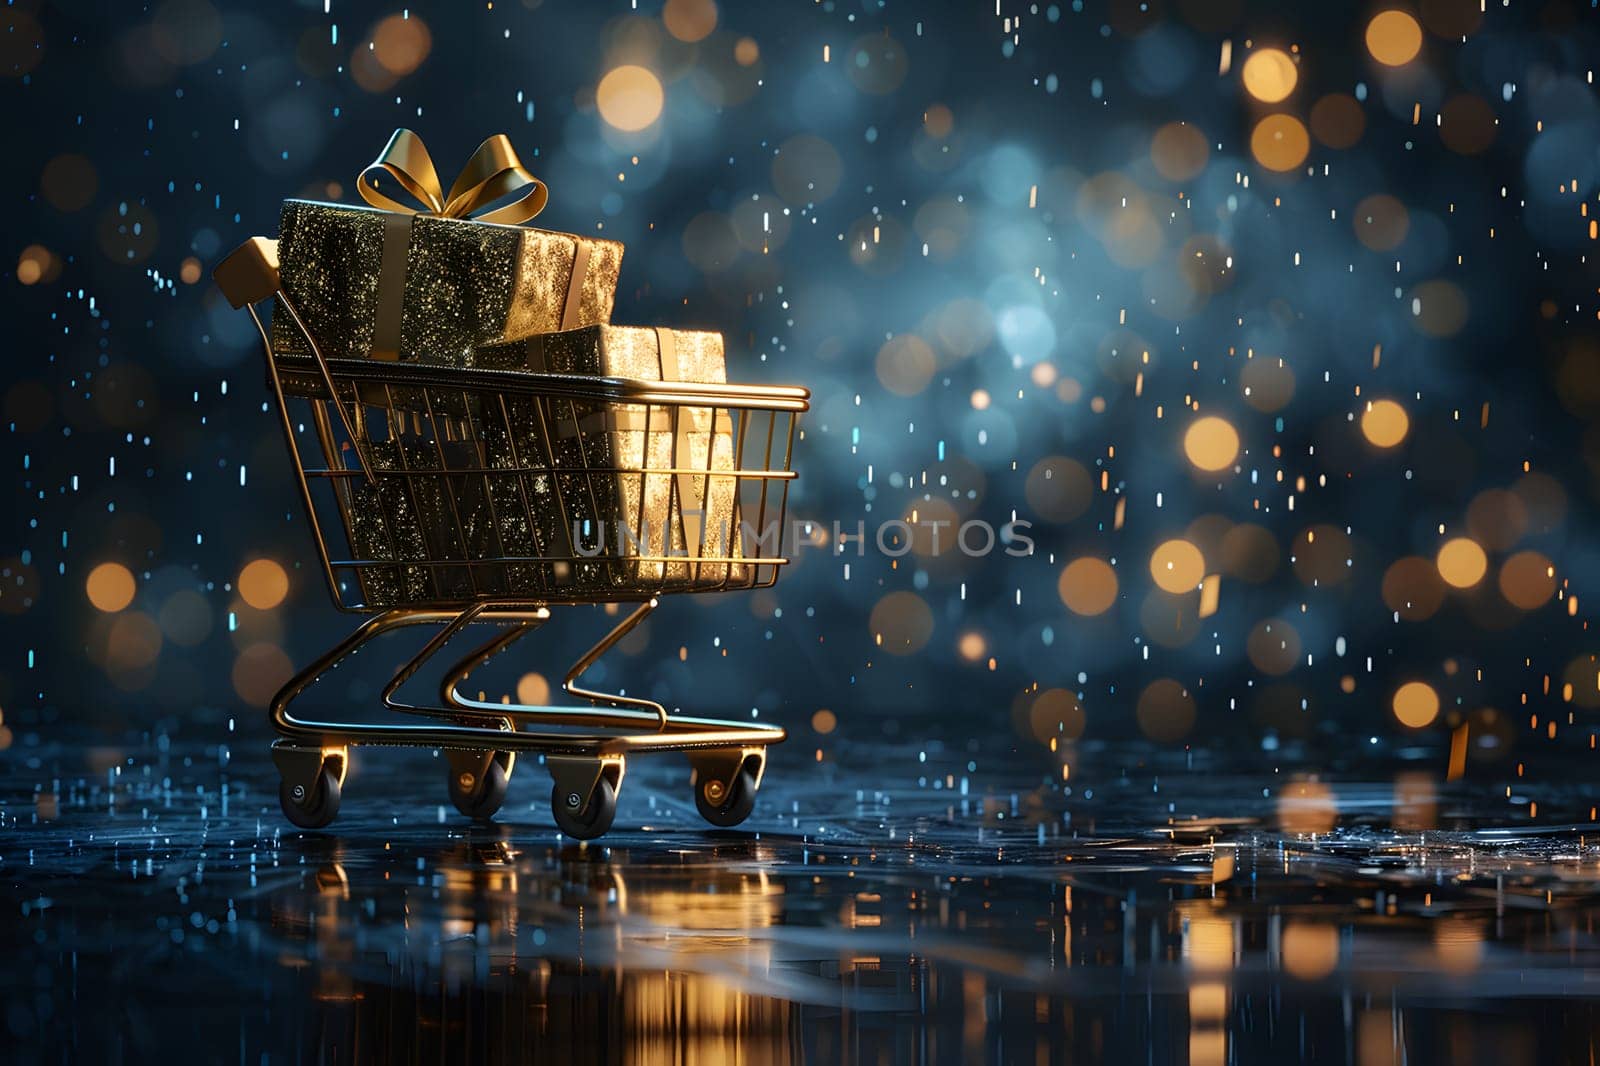 A shopping cart filled with gifts in the darkness at midnight by Nadtochiy